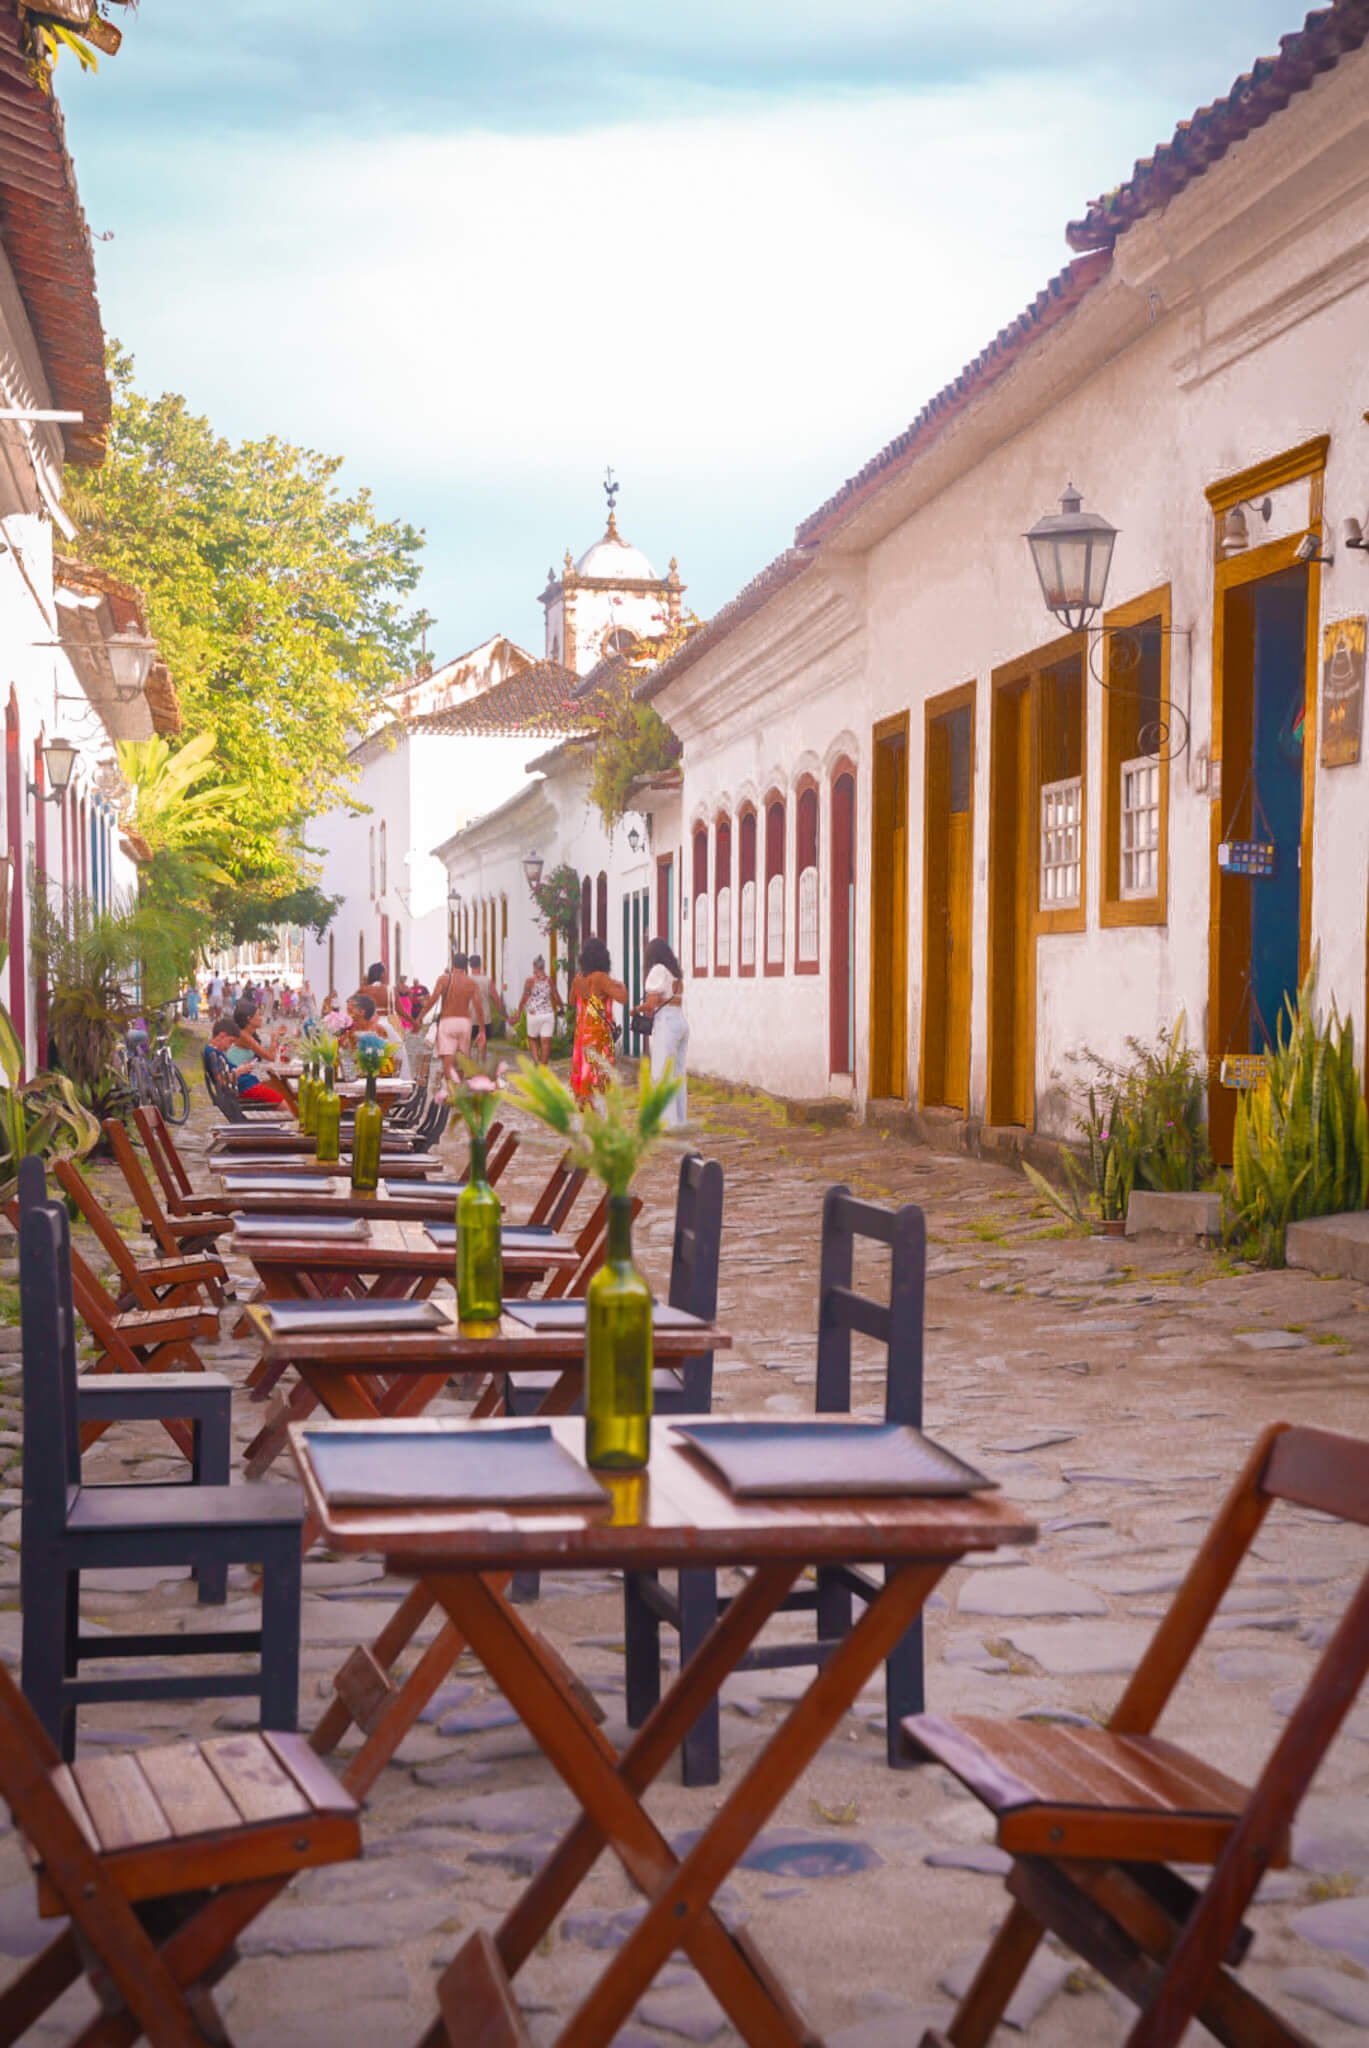 Old town of Paraty. things to do in Paraty, Brazil